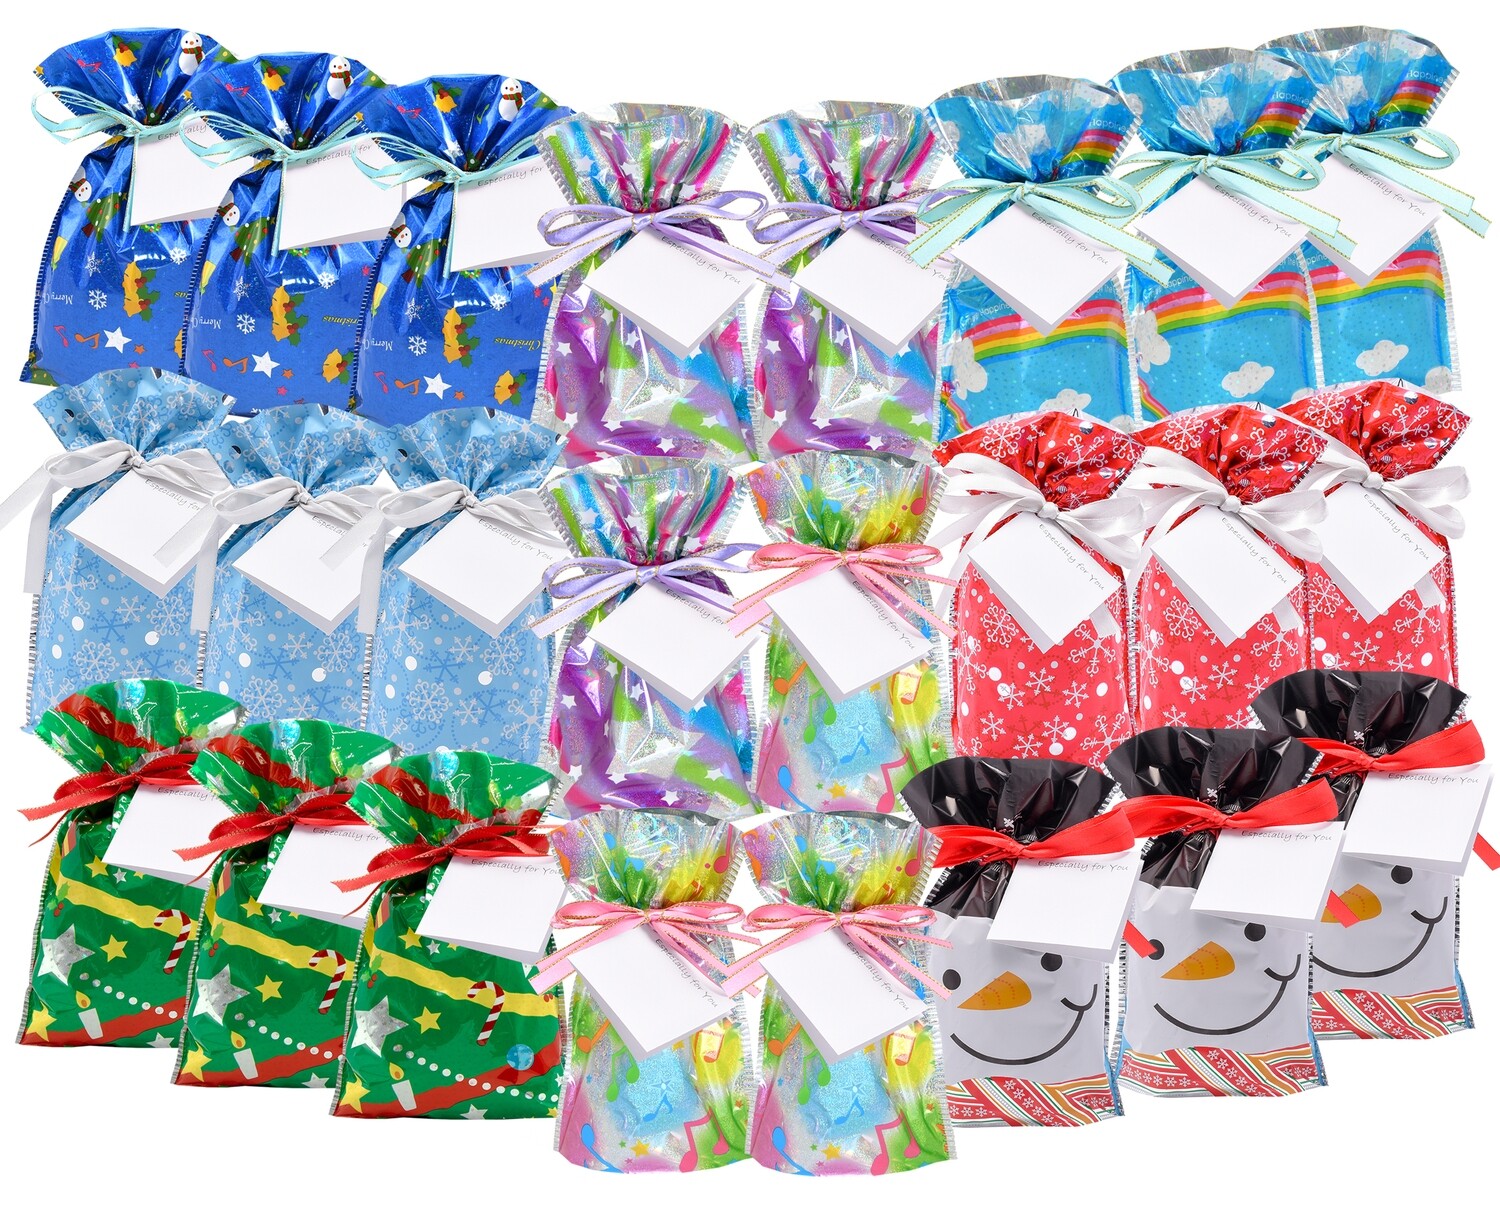 48 Piece Small Gift Bag Set (24 Gift Bags and 24 Gift Tags)